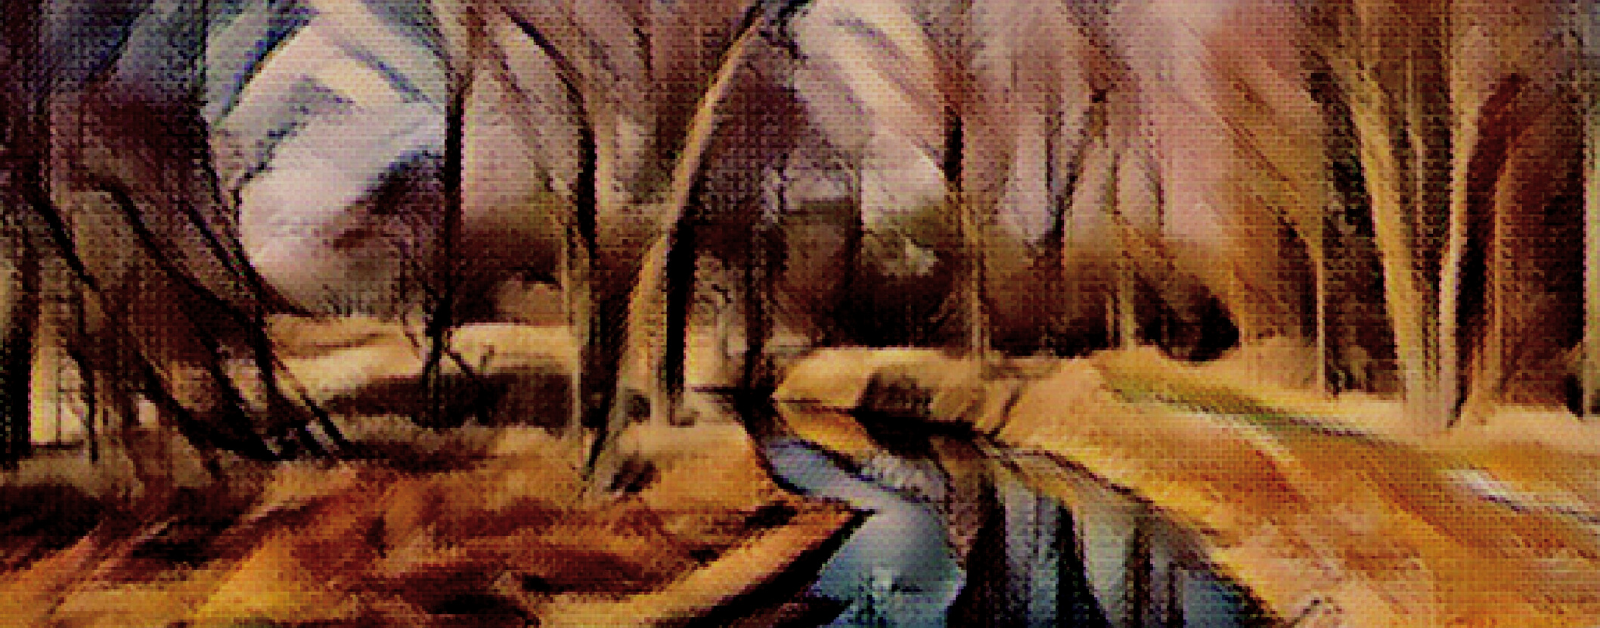 stream and trees photo with painting filter